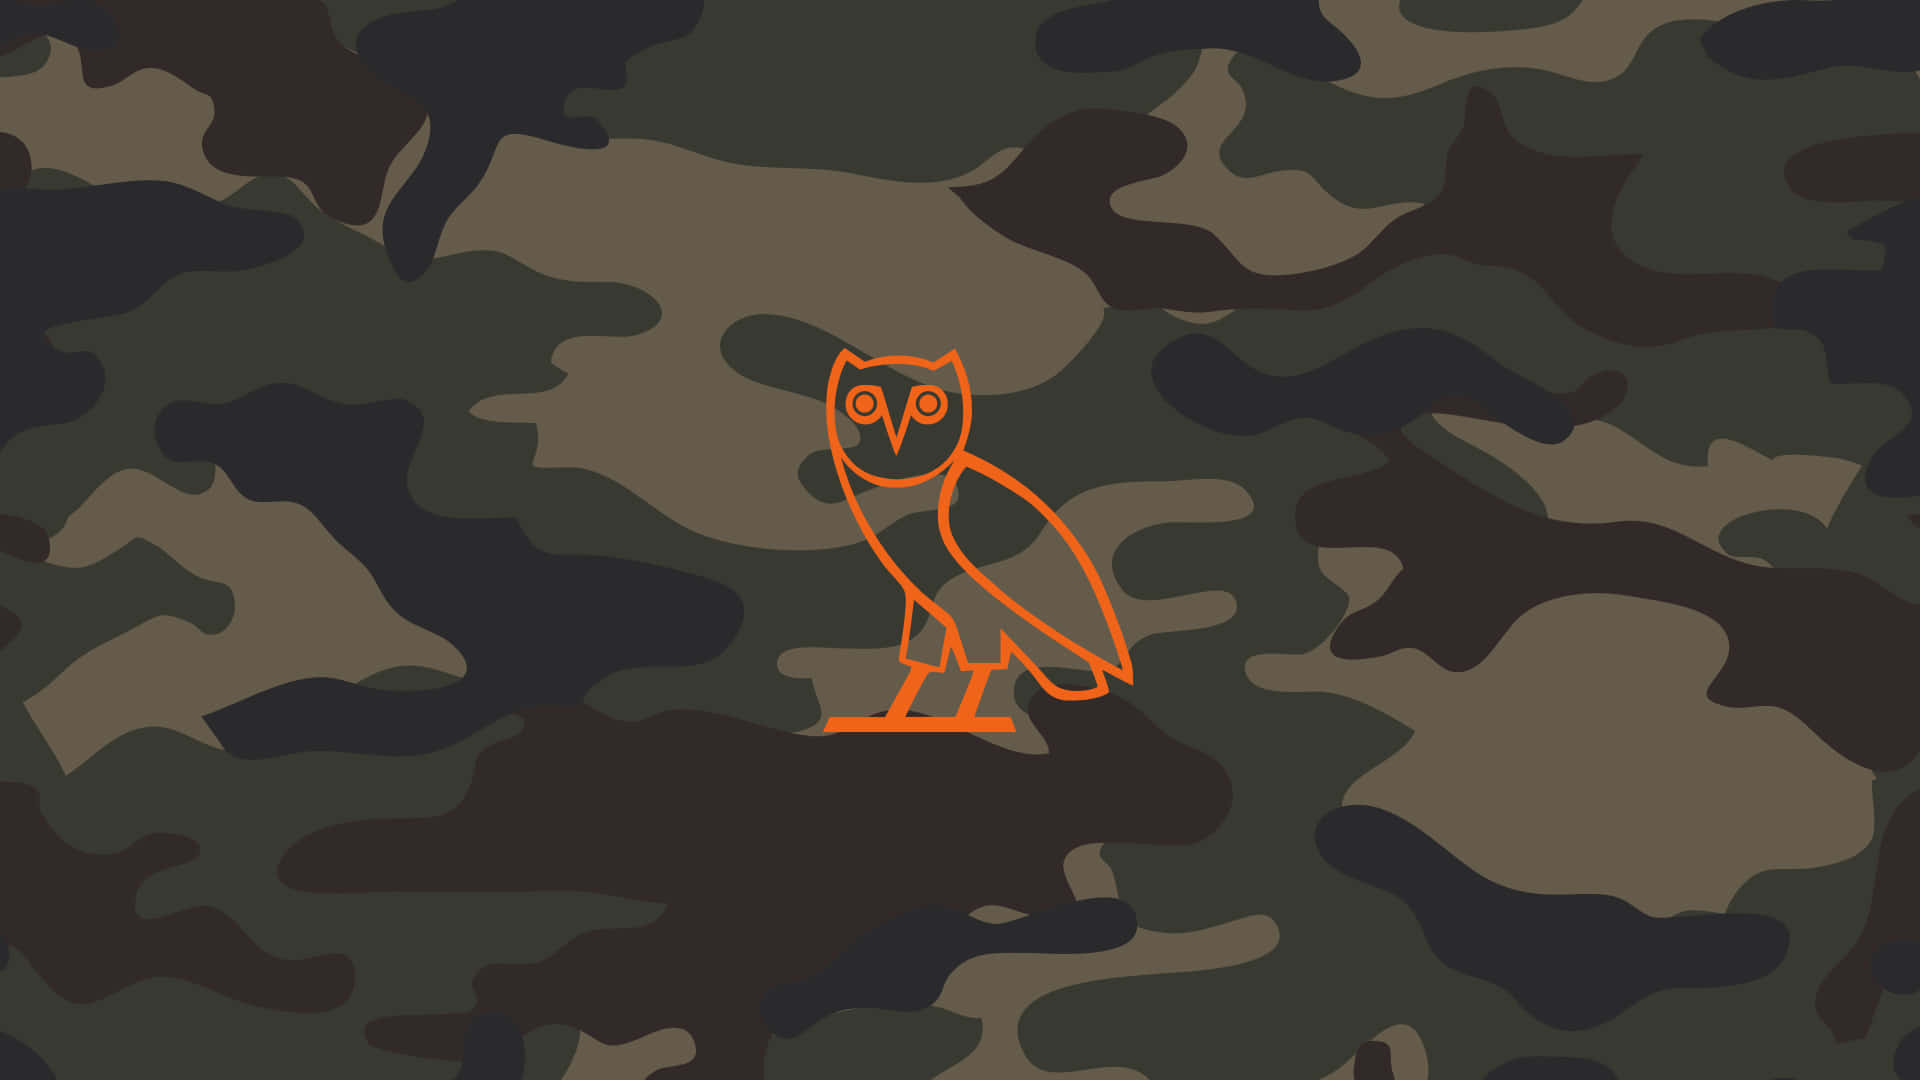 "OVO XO branded logo representing the Canadian duo's music connection" Wallpaper